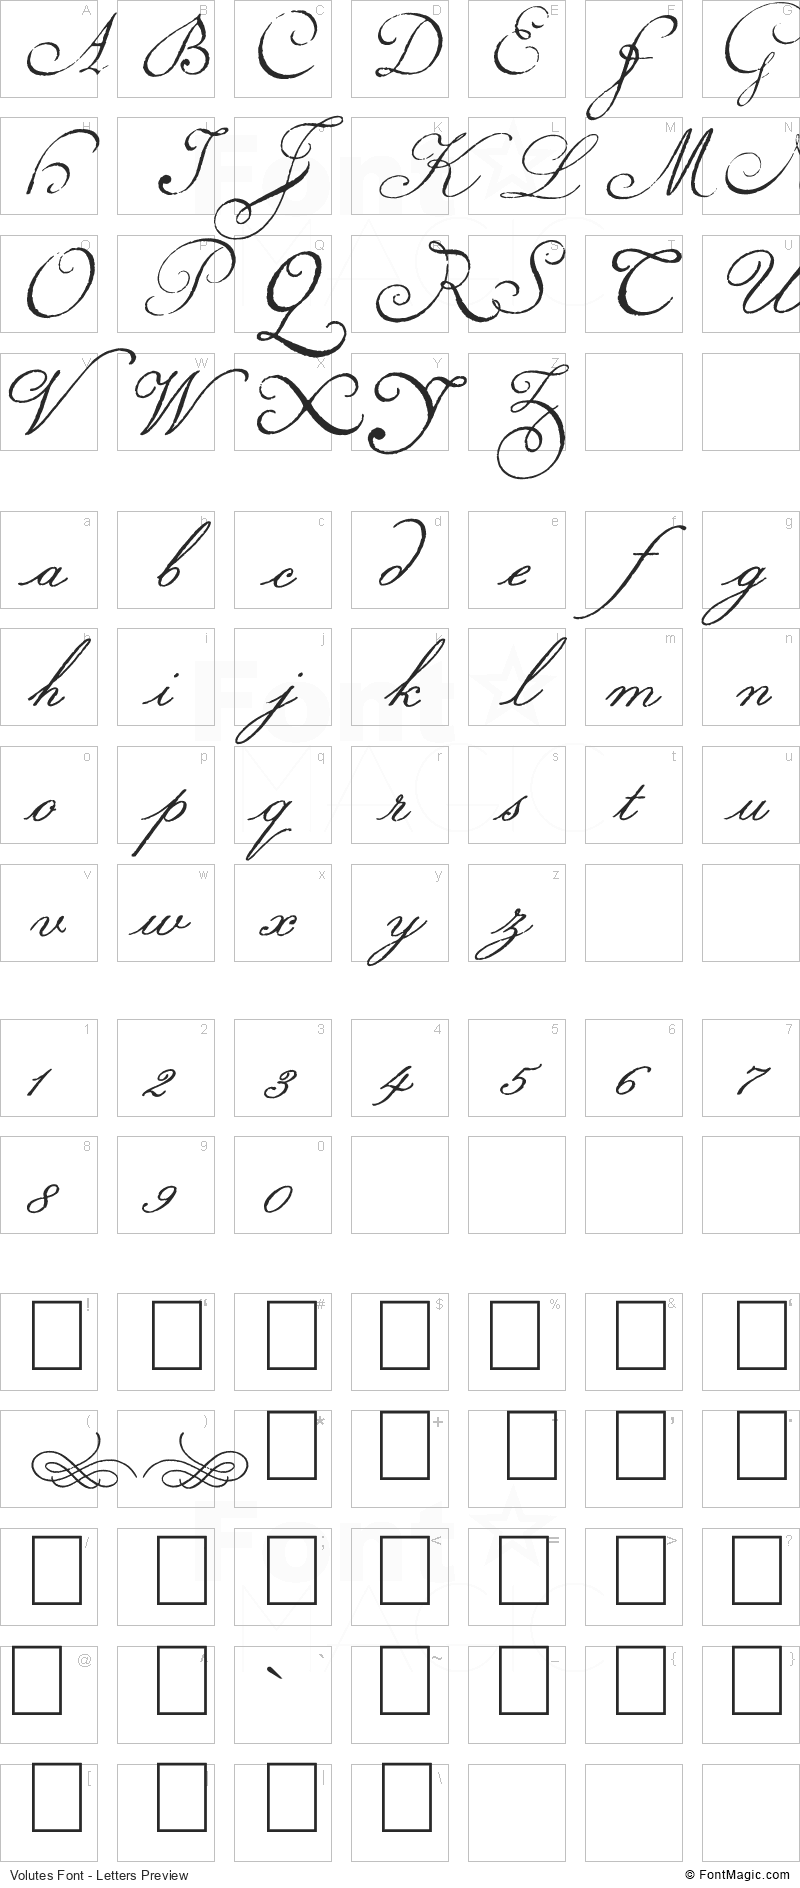 Volutes Font - All Latters Preview Chart